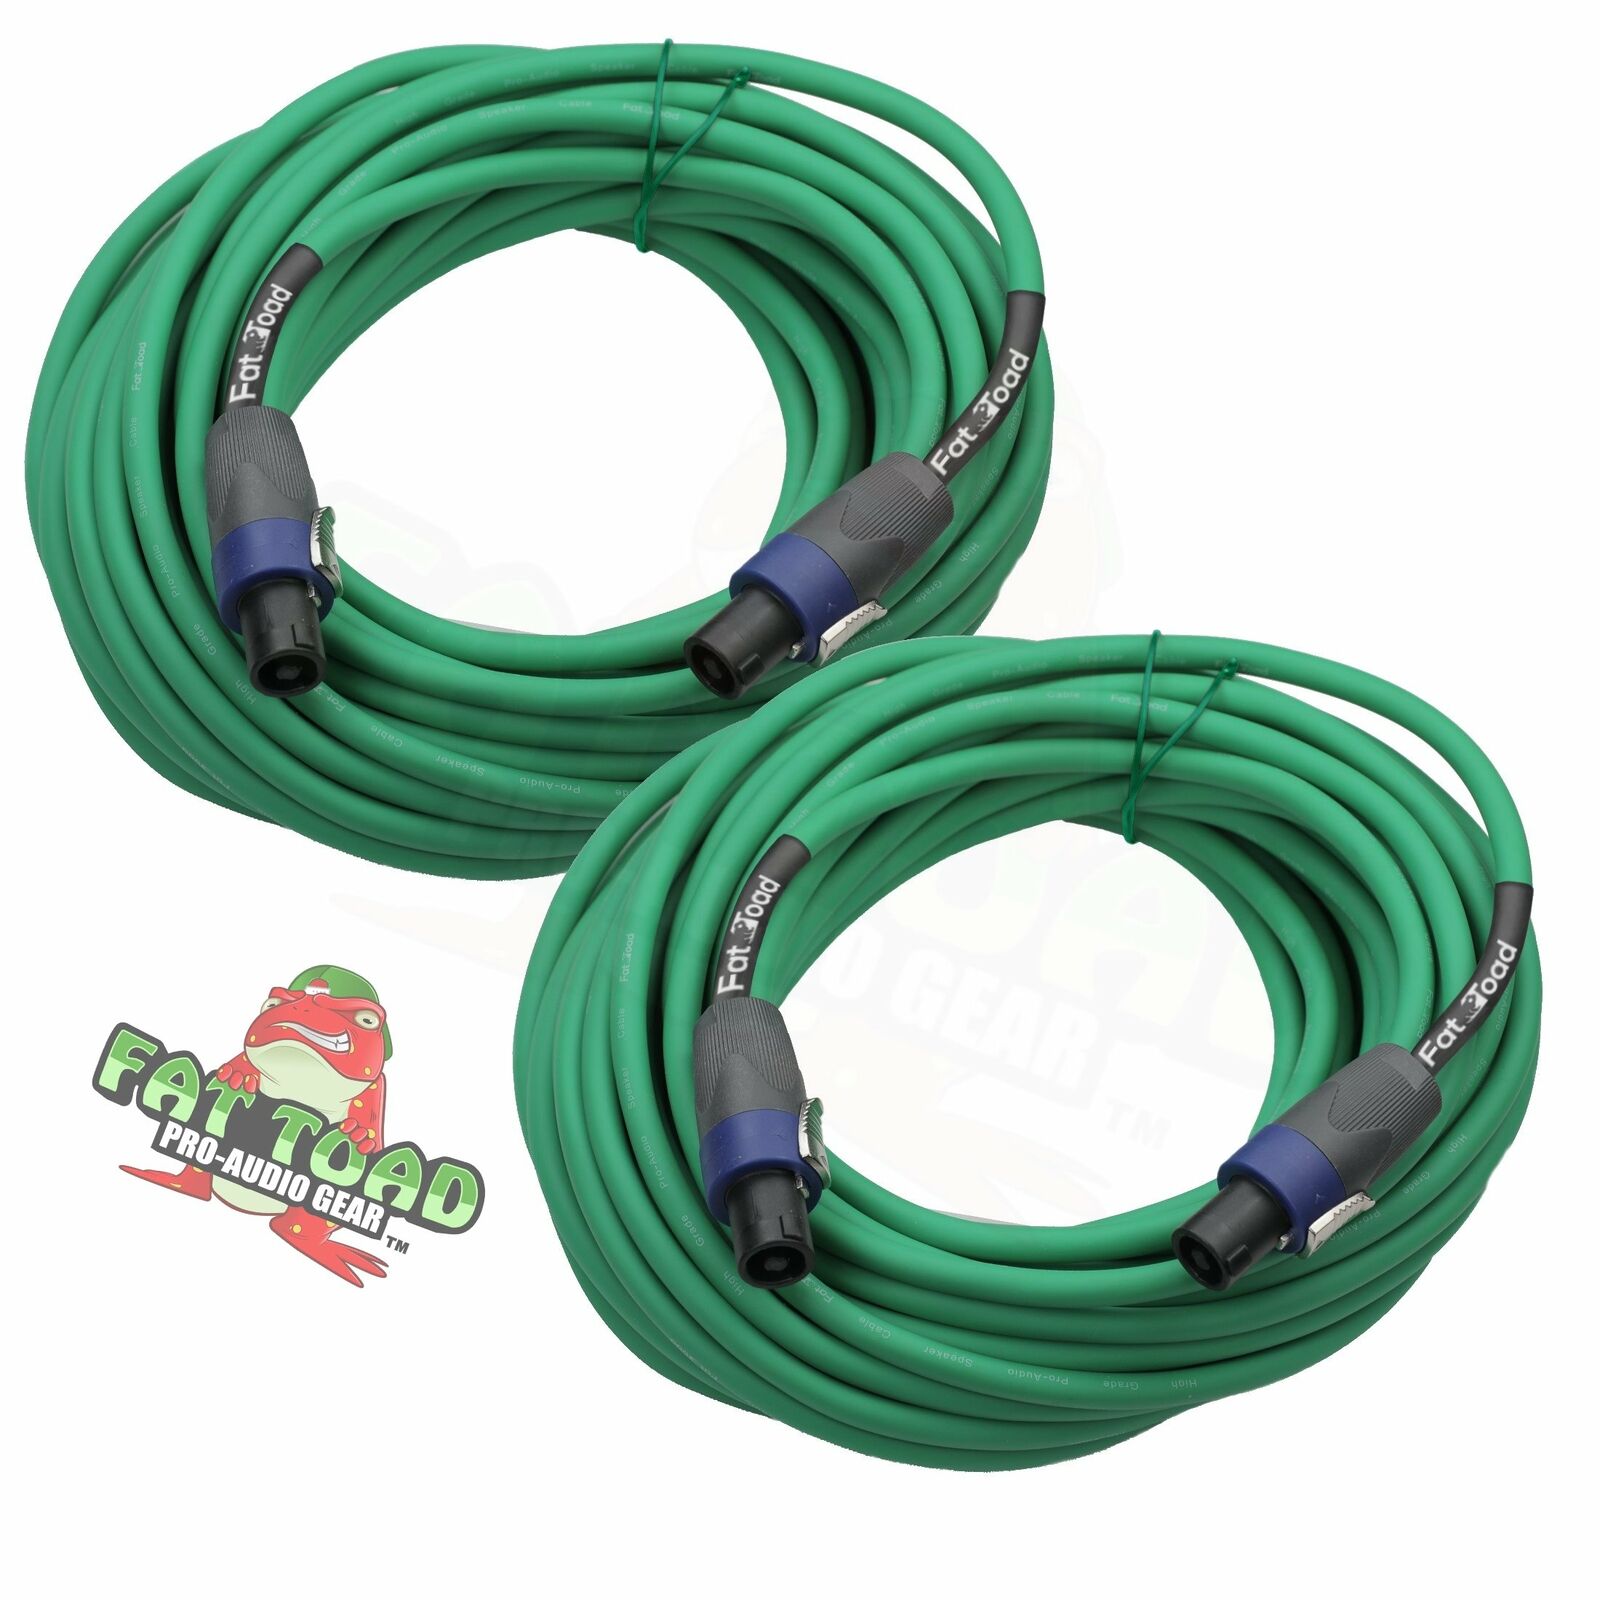 Speakon Cables 50 FT 2 PACK 12 AWG Wires –FAT TOAD Speaker Cords Pro Audio Stage. Available Now for $42.95